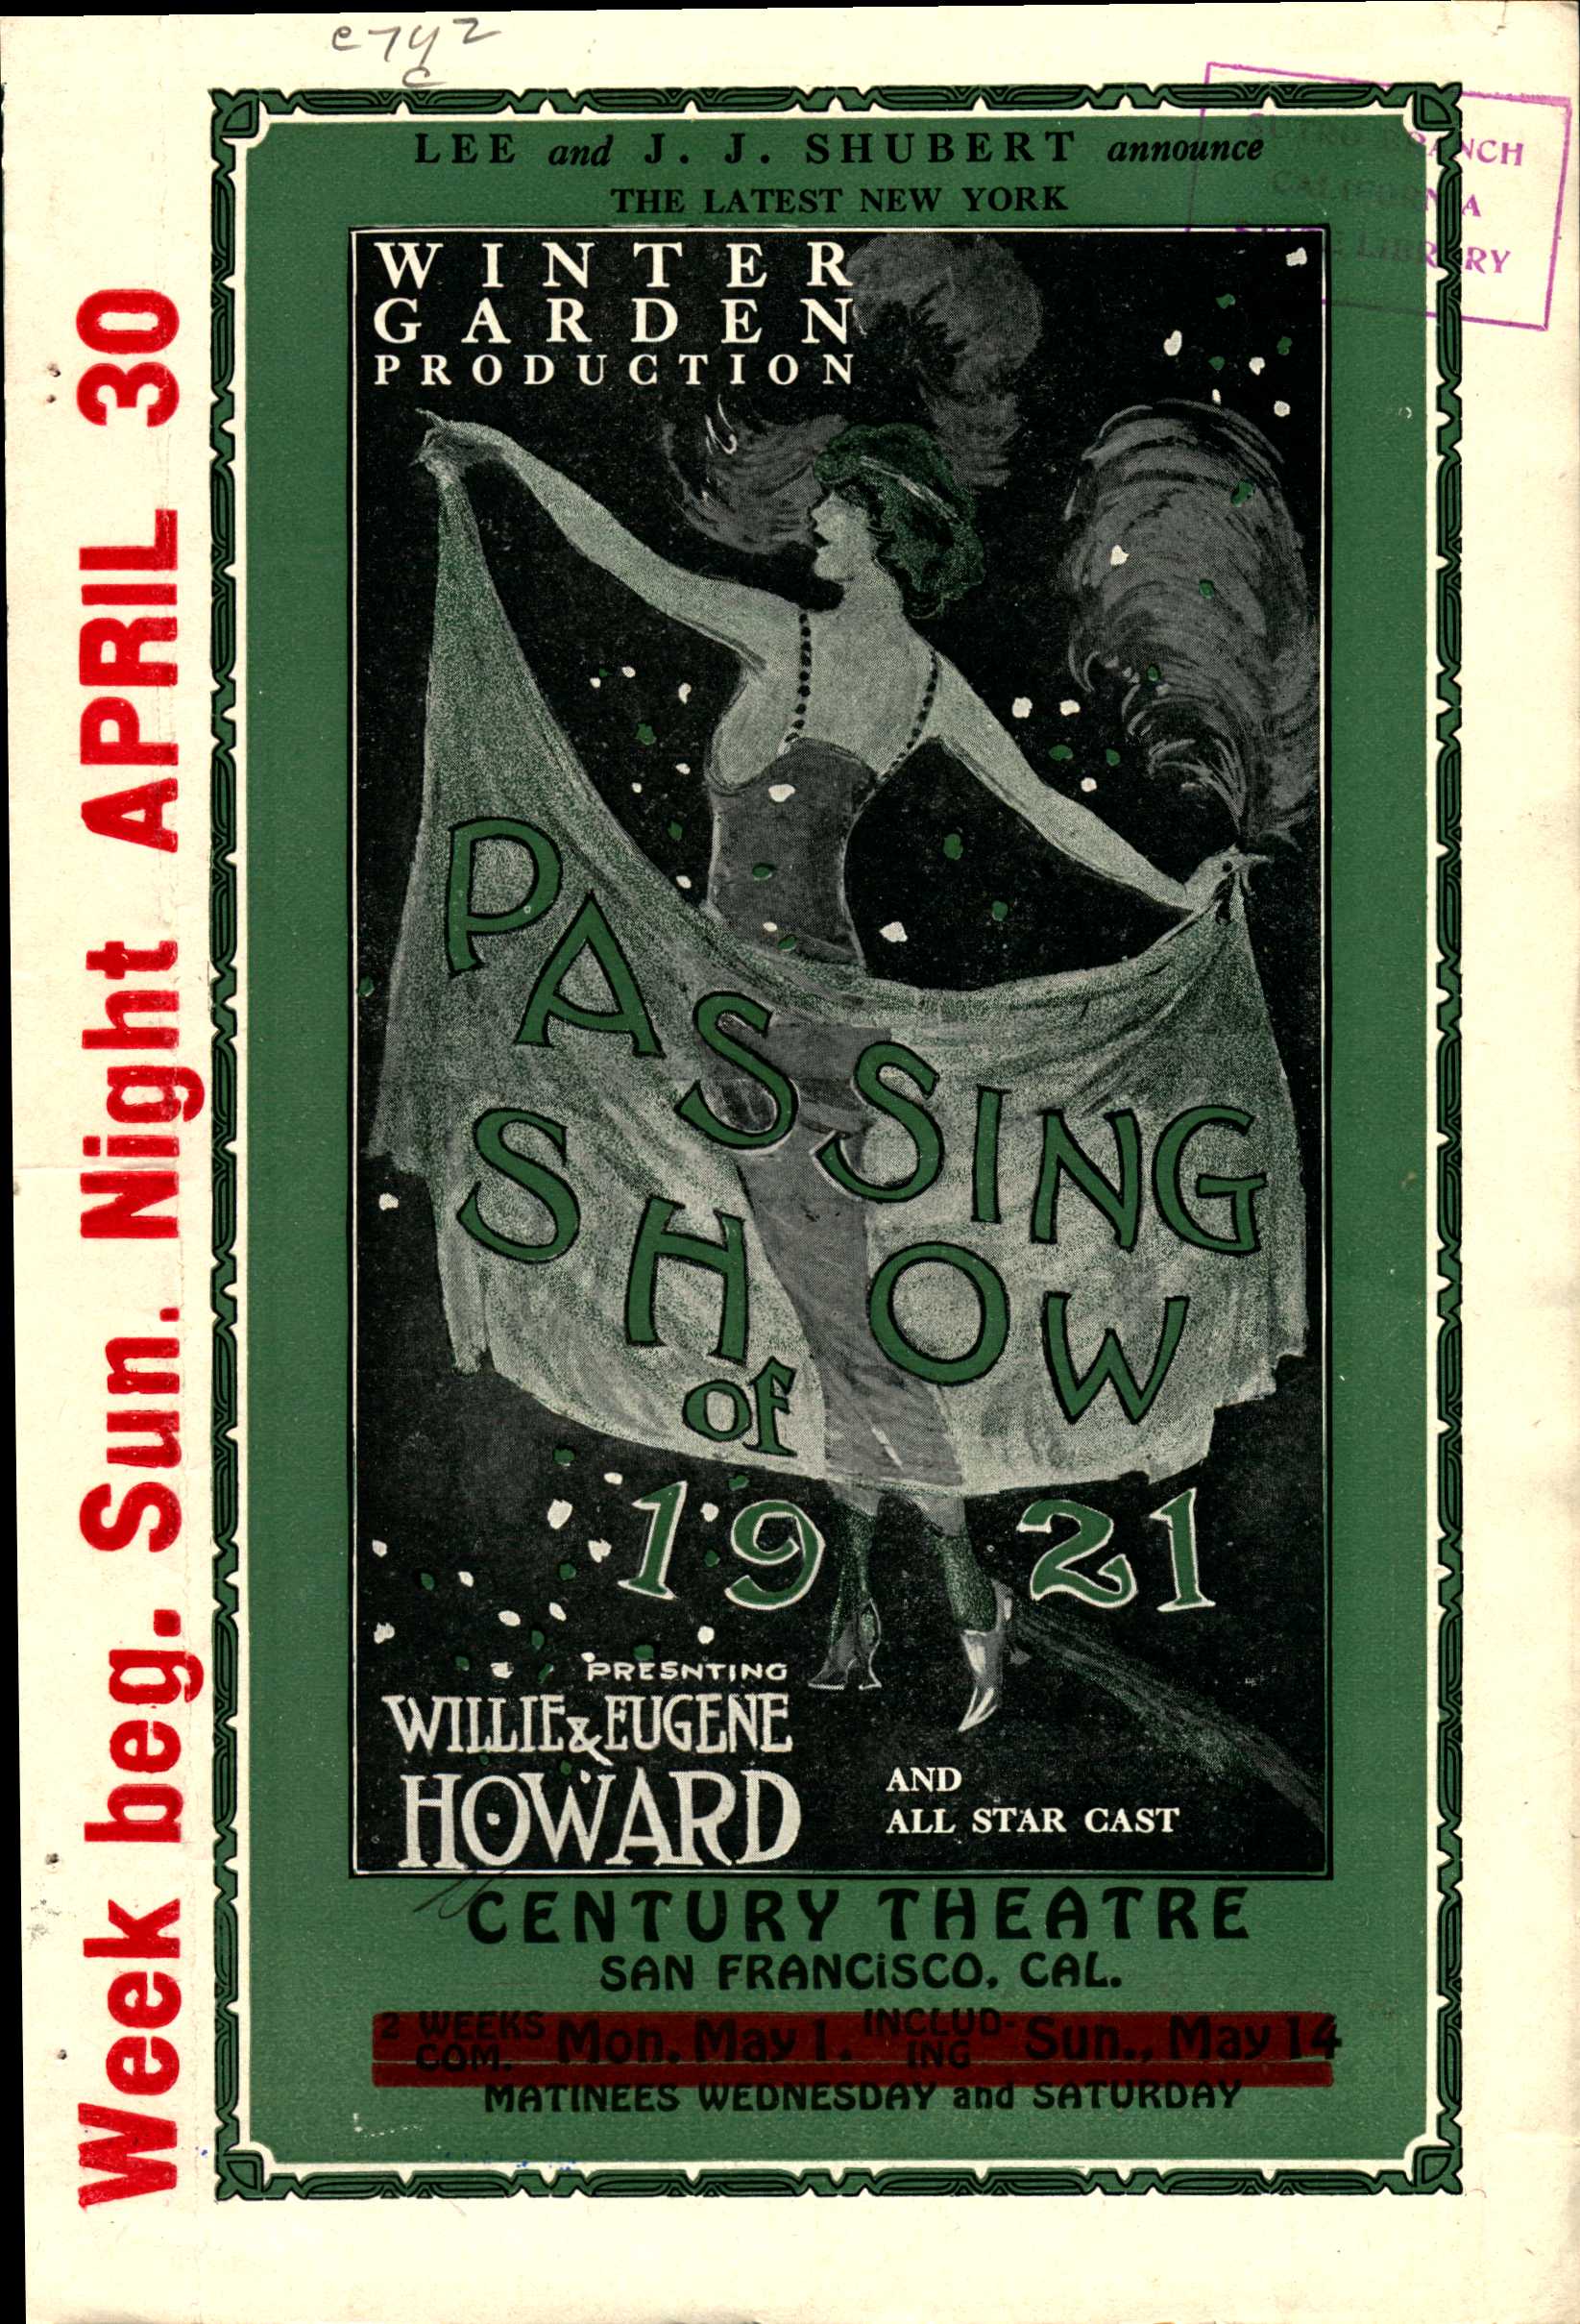 Front cover shows a showgirl in an evening gown and production information